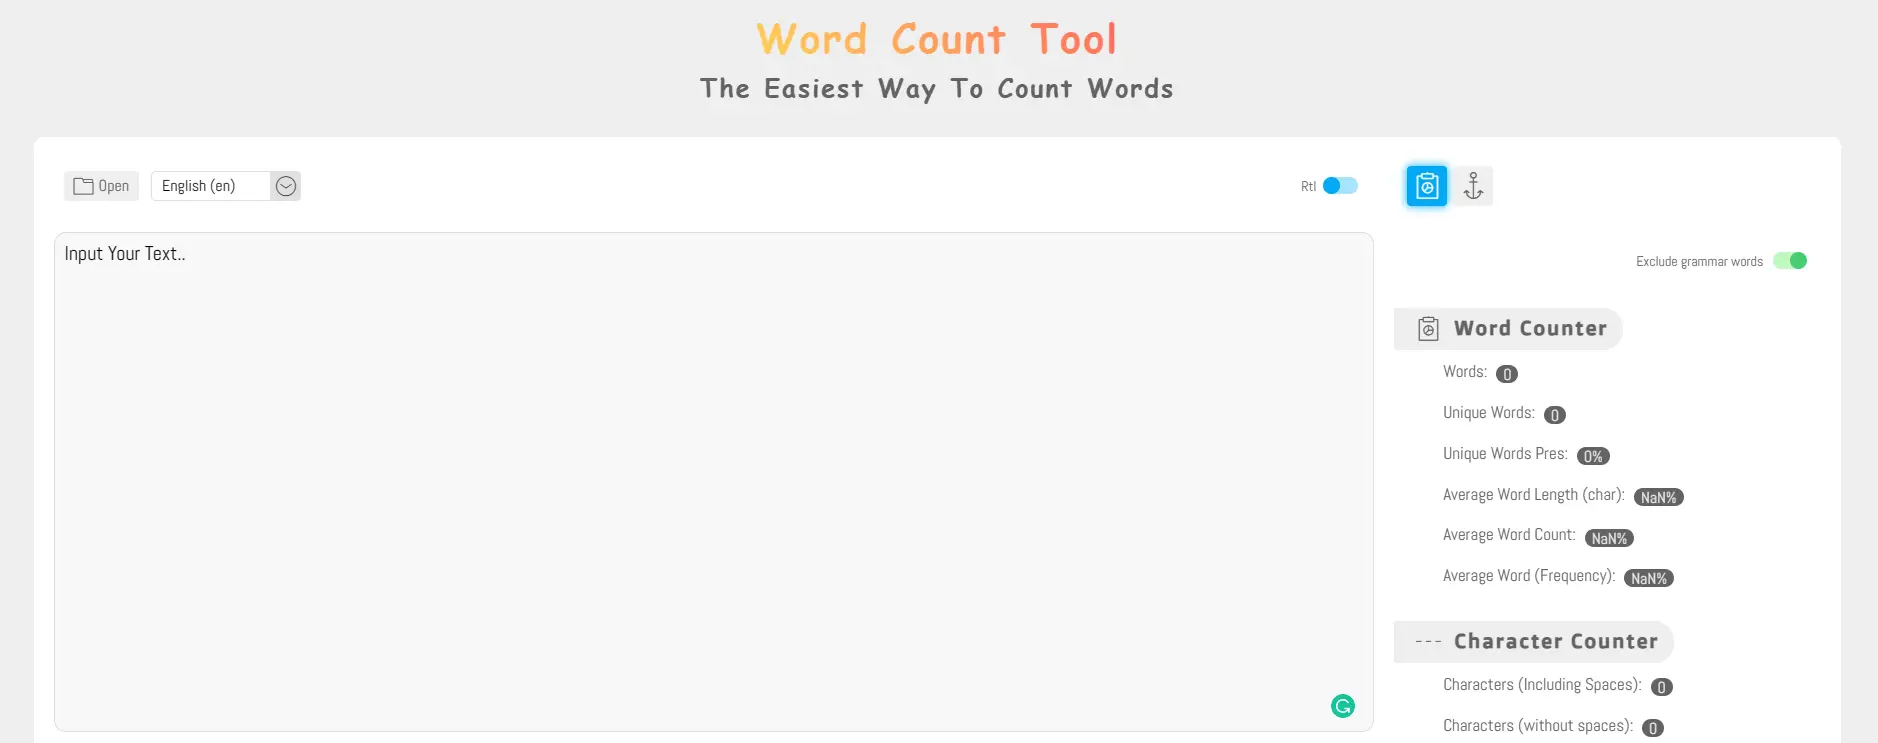 How do you use the word counter tool